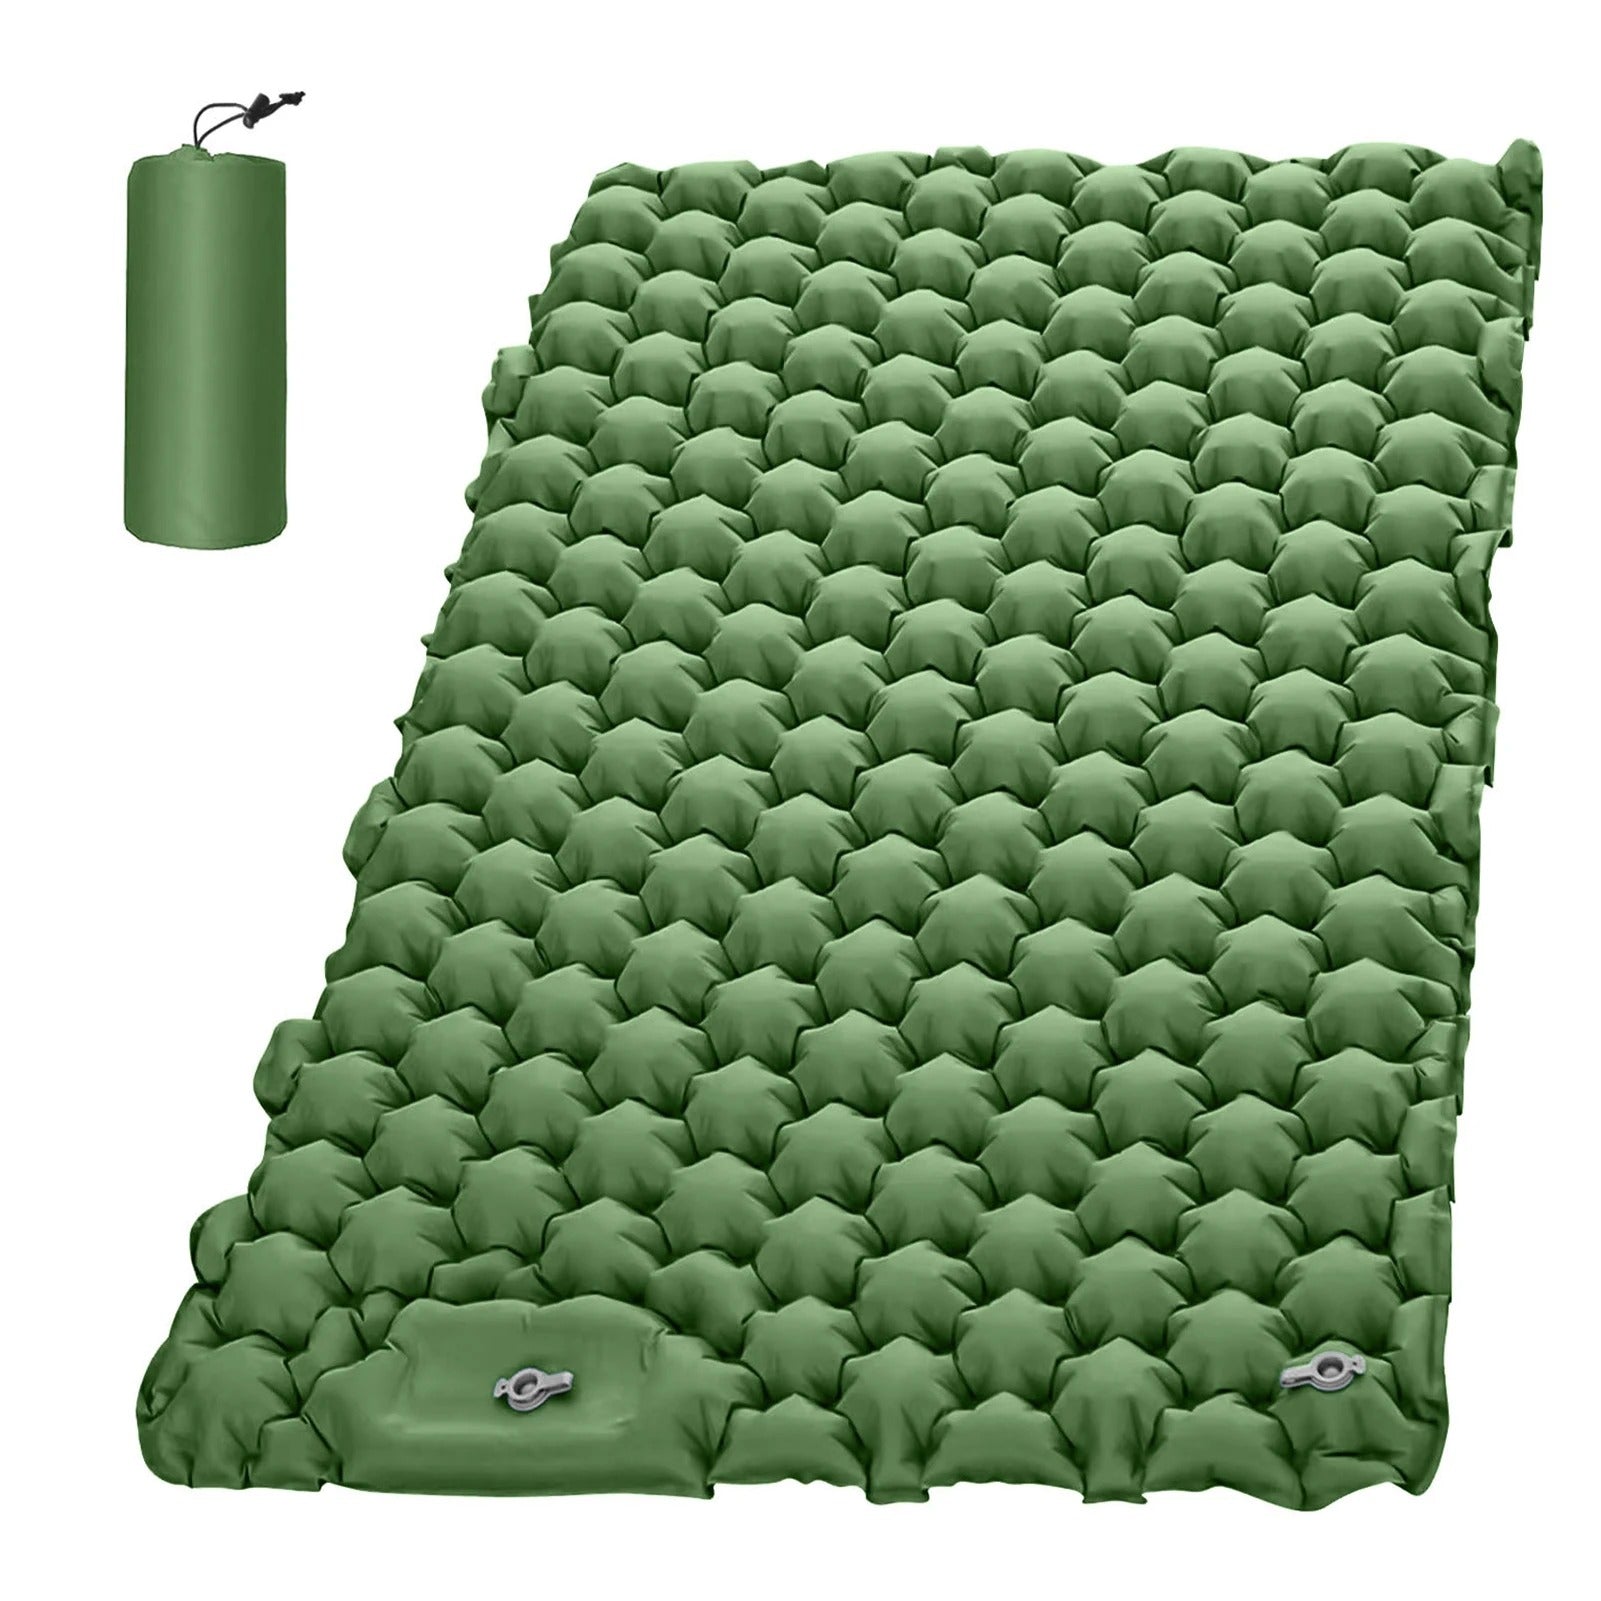 Matelas gonflable double vert